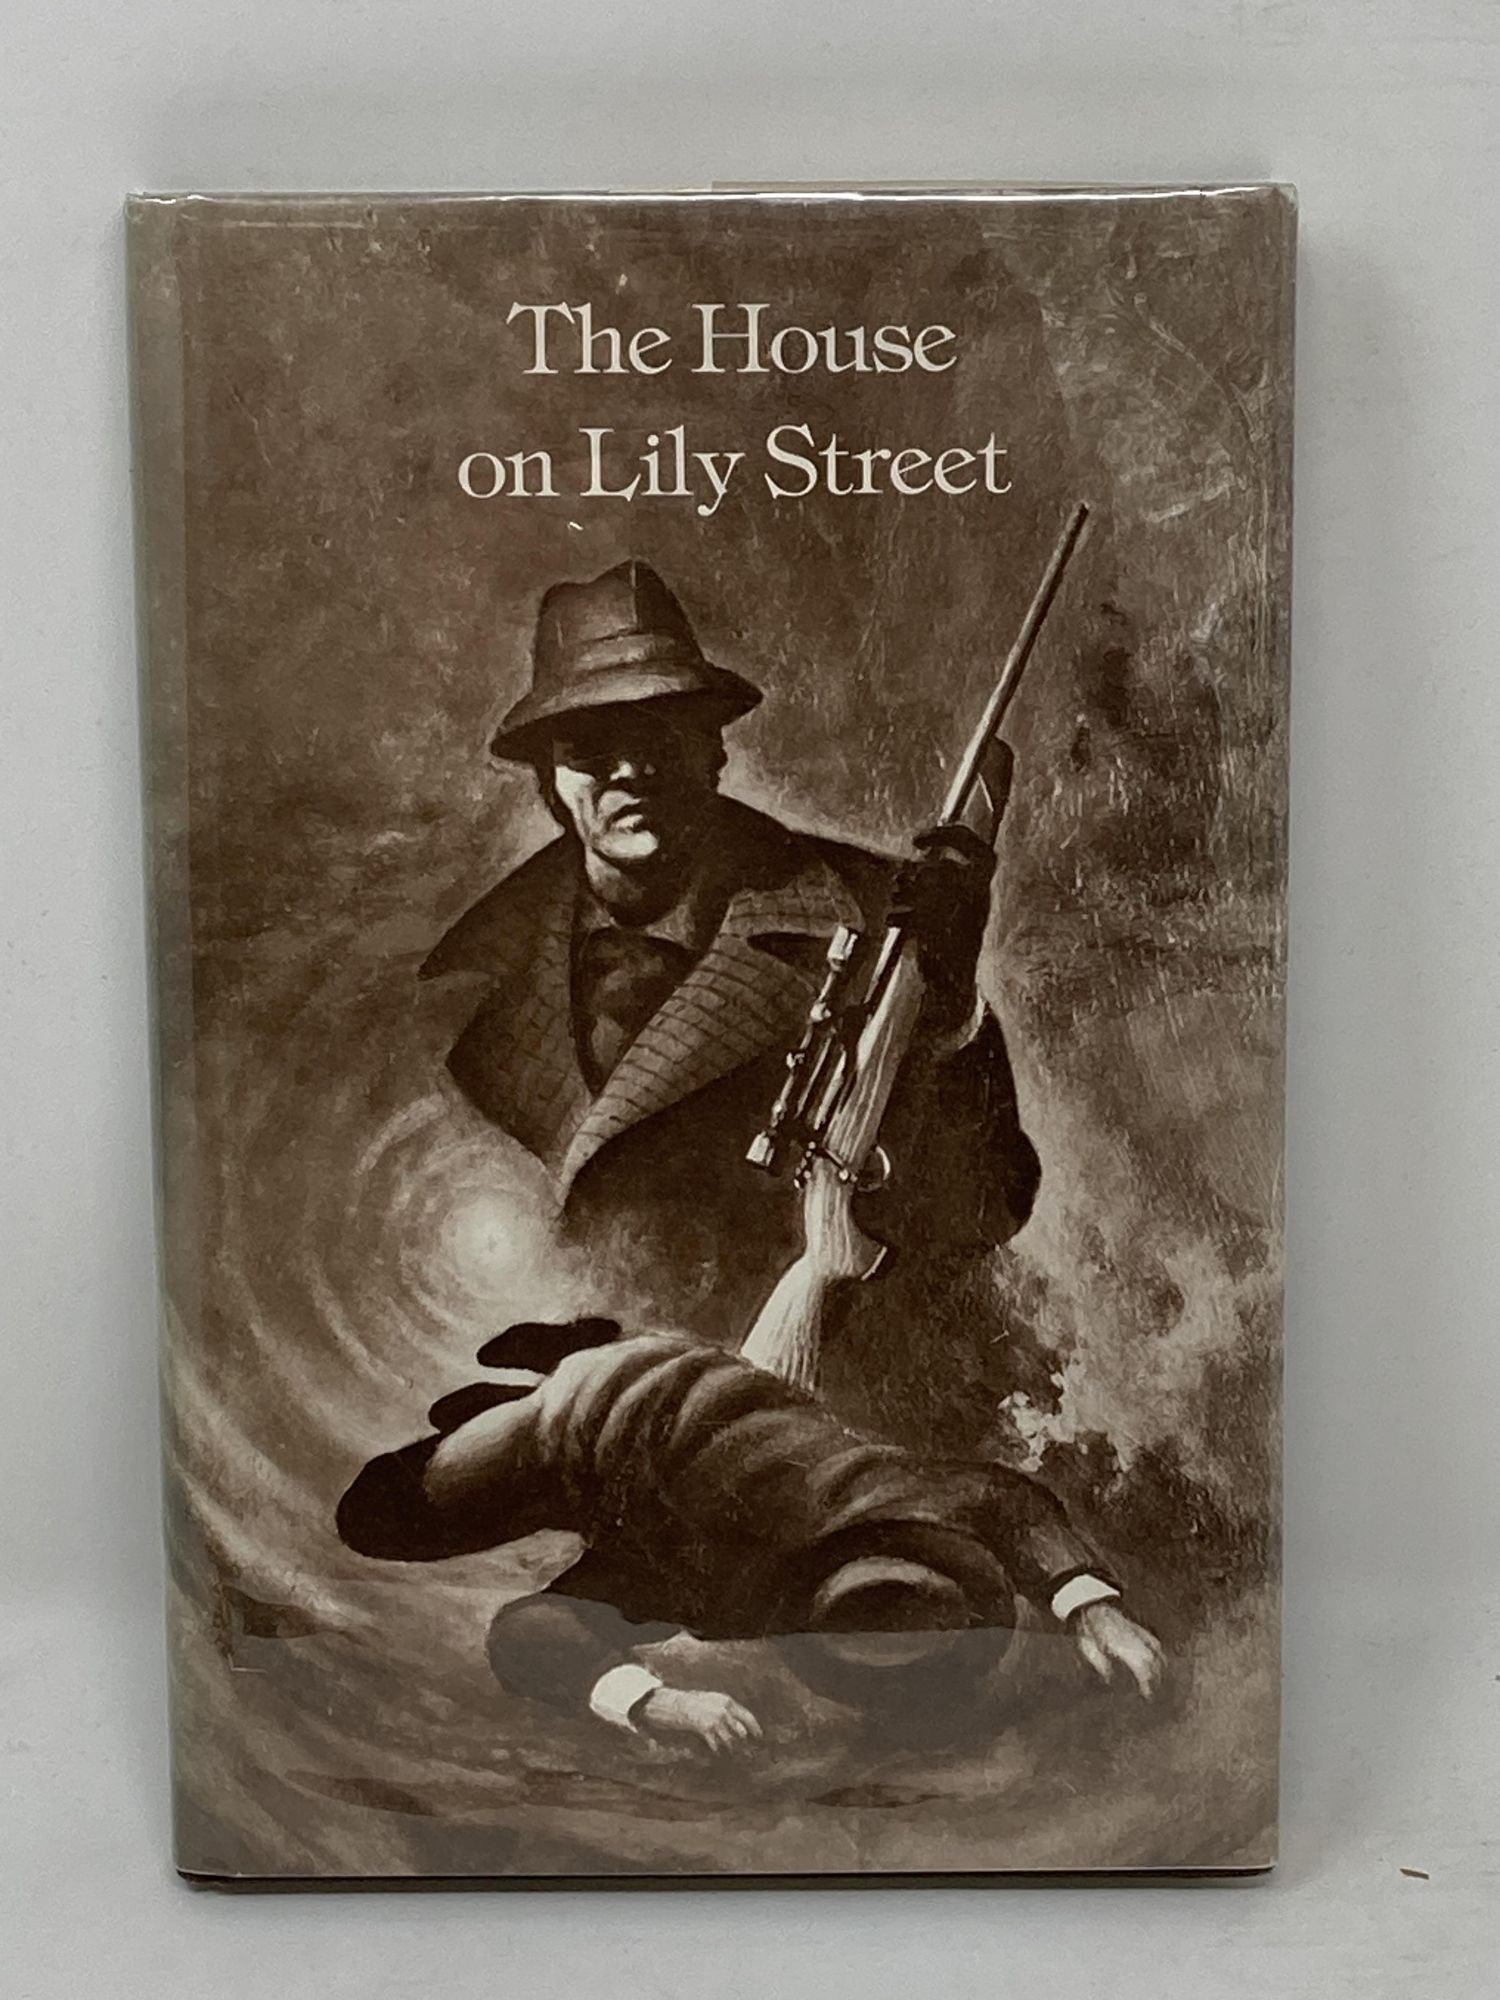 Vance, Jack - The House on Lily Street (Signed)